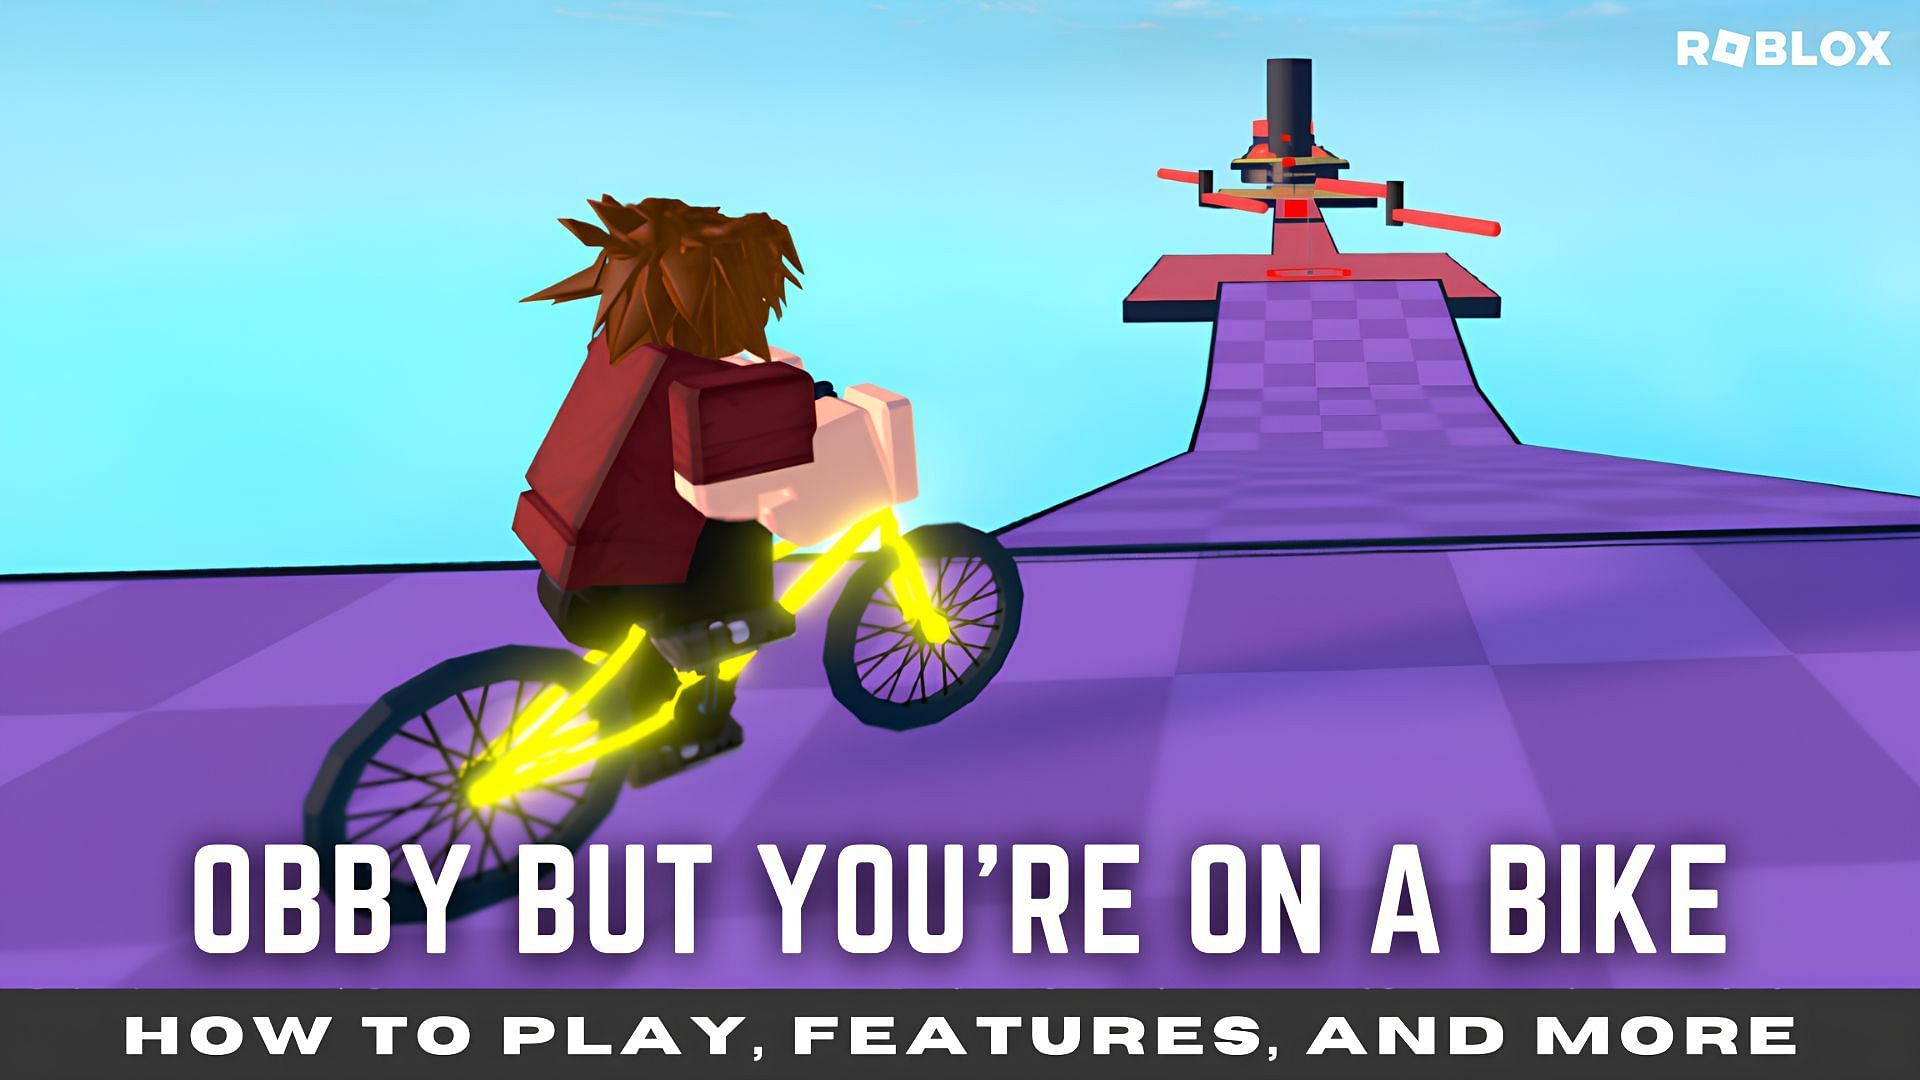 Exploring all the Gamepasses in Roblox Obby But You're On a Bike